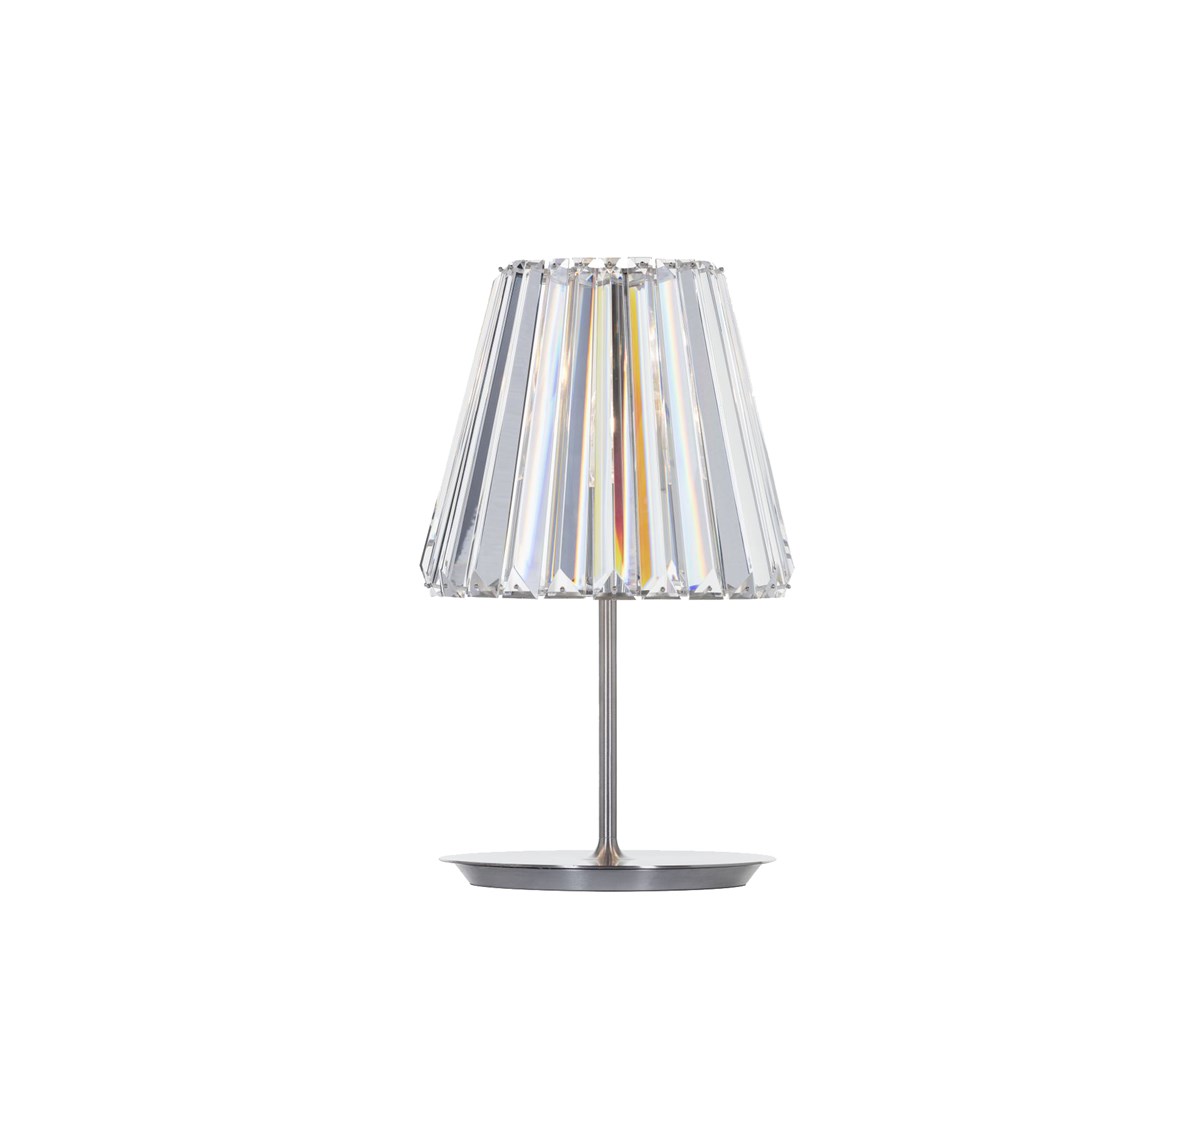 This001 Glitters Table Lamp Base Size CL001TA 1CE00 0102S1 F 1920